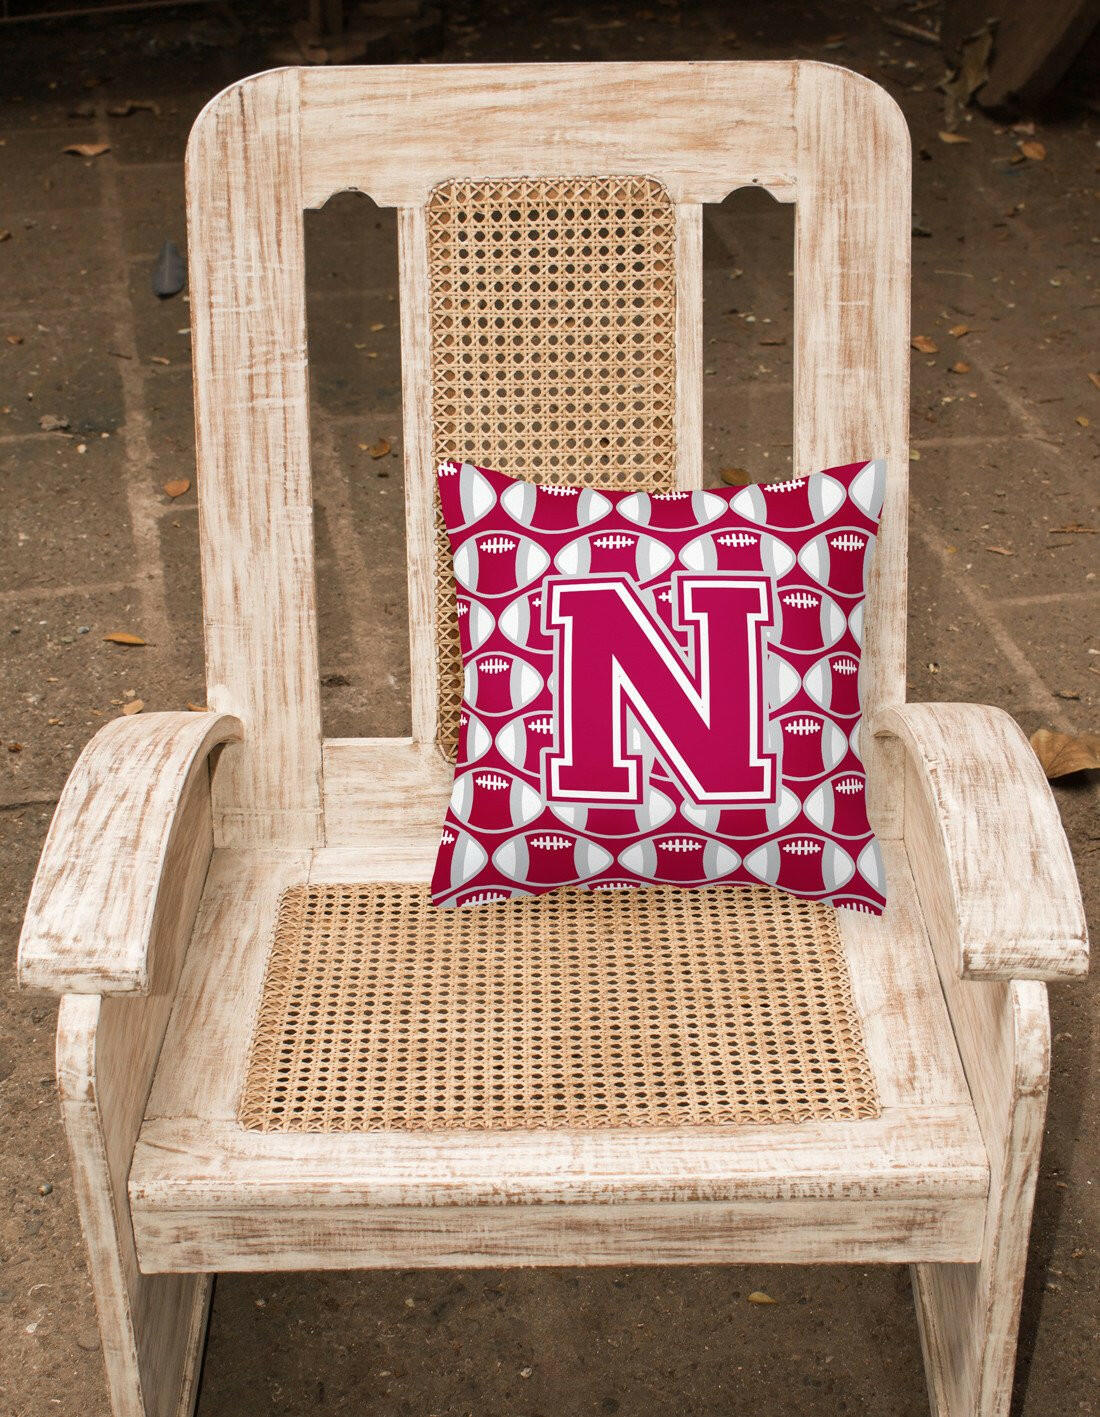 Letter N Football Crimson, grey and white Fabric Decorative Pillow CJ1065-NPW1414 by Caroline's Treasures